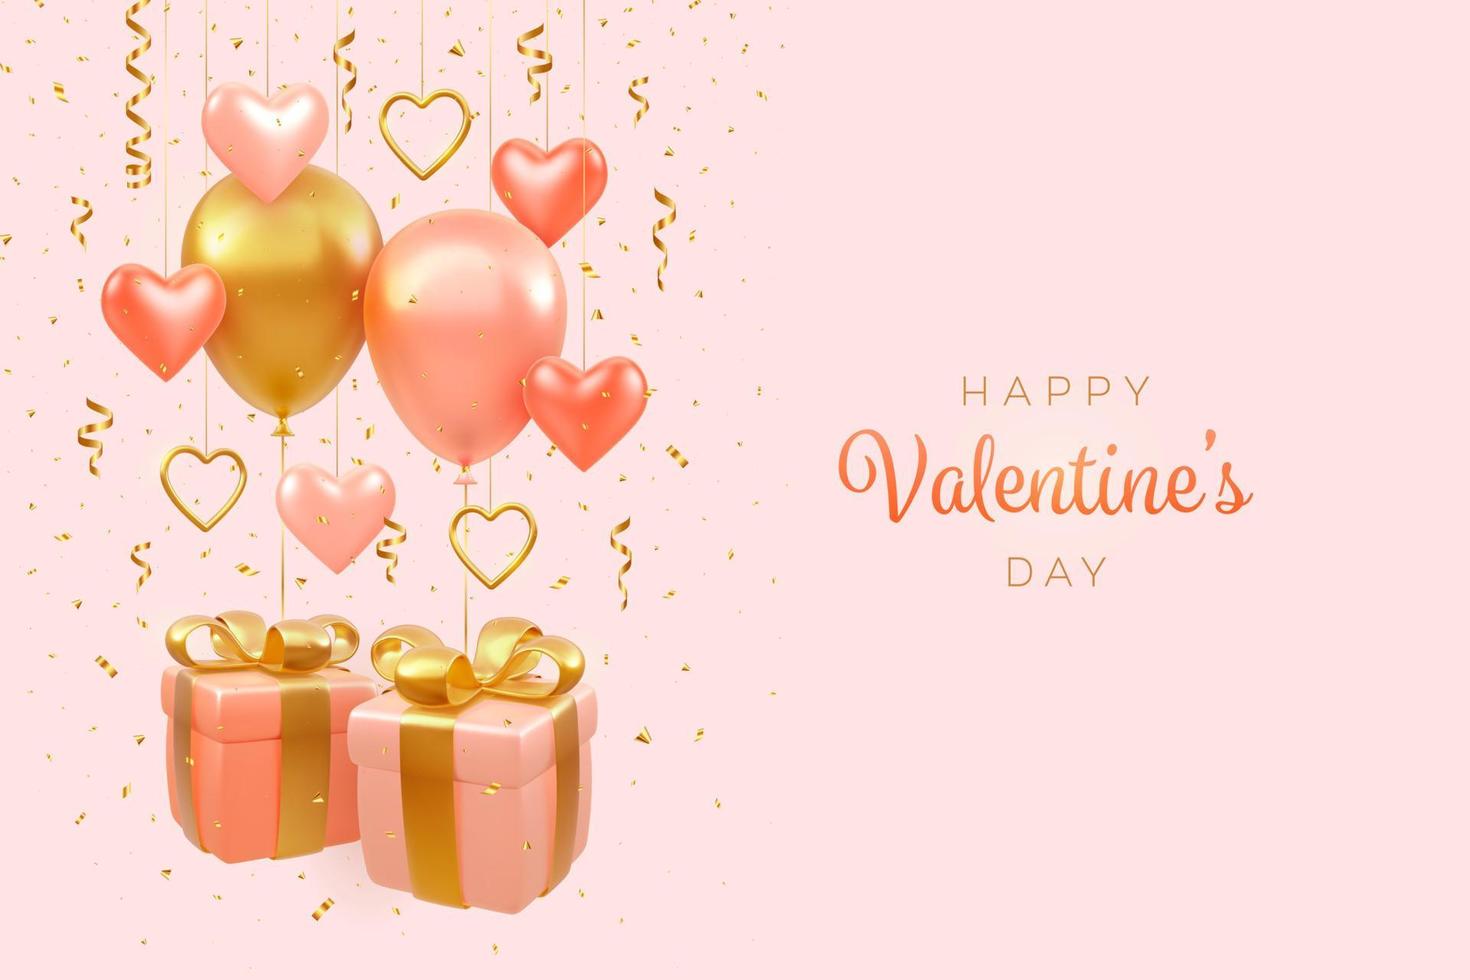 Valentine's Day background, banner. Realistic festive pink gift boxes with golden bow. Balloons fly helium round and hearts shape. 3d gold metallic hearts and glitter confetti. Vector illustration.